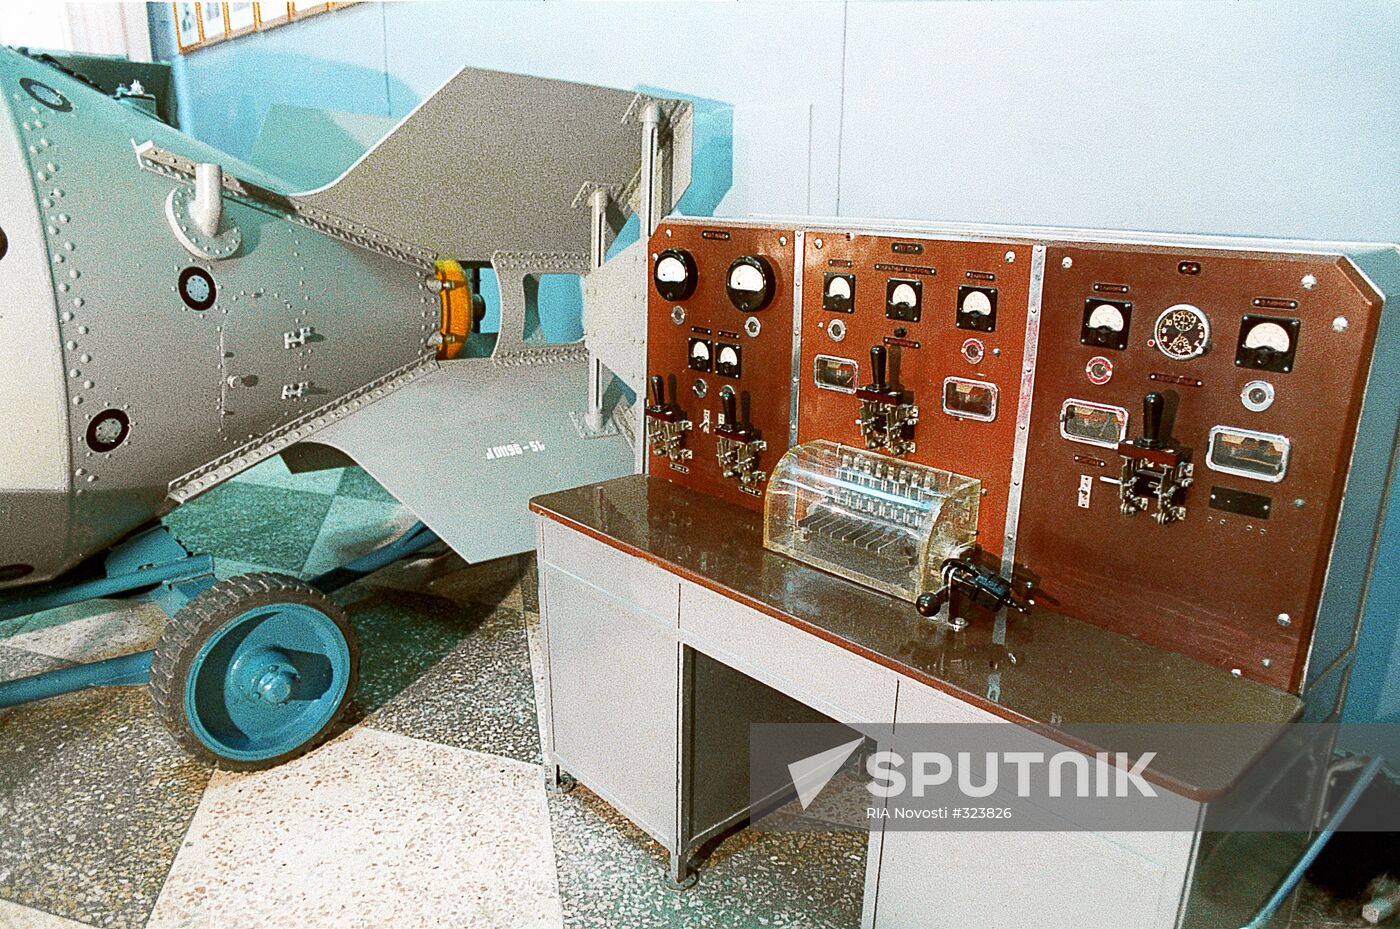 Control console for the nuclear bomb detonation